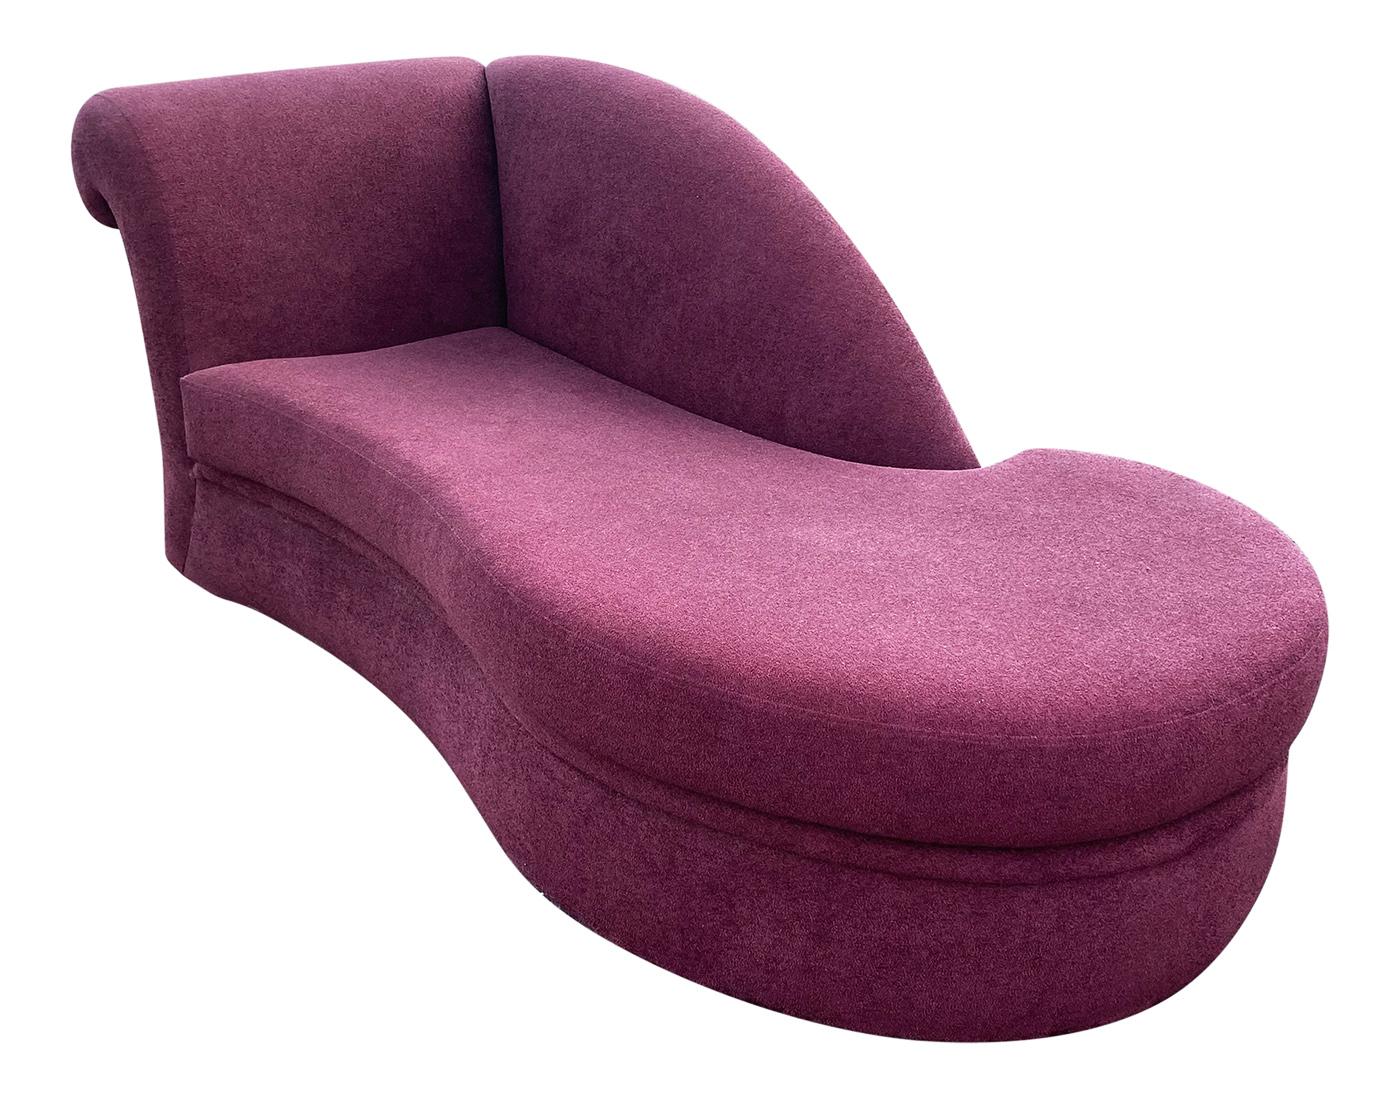 curvy chaise lounge